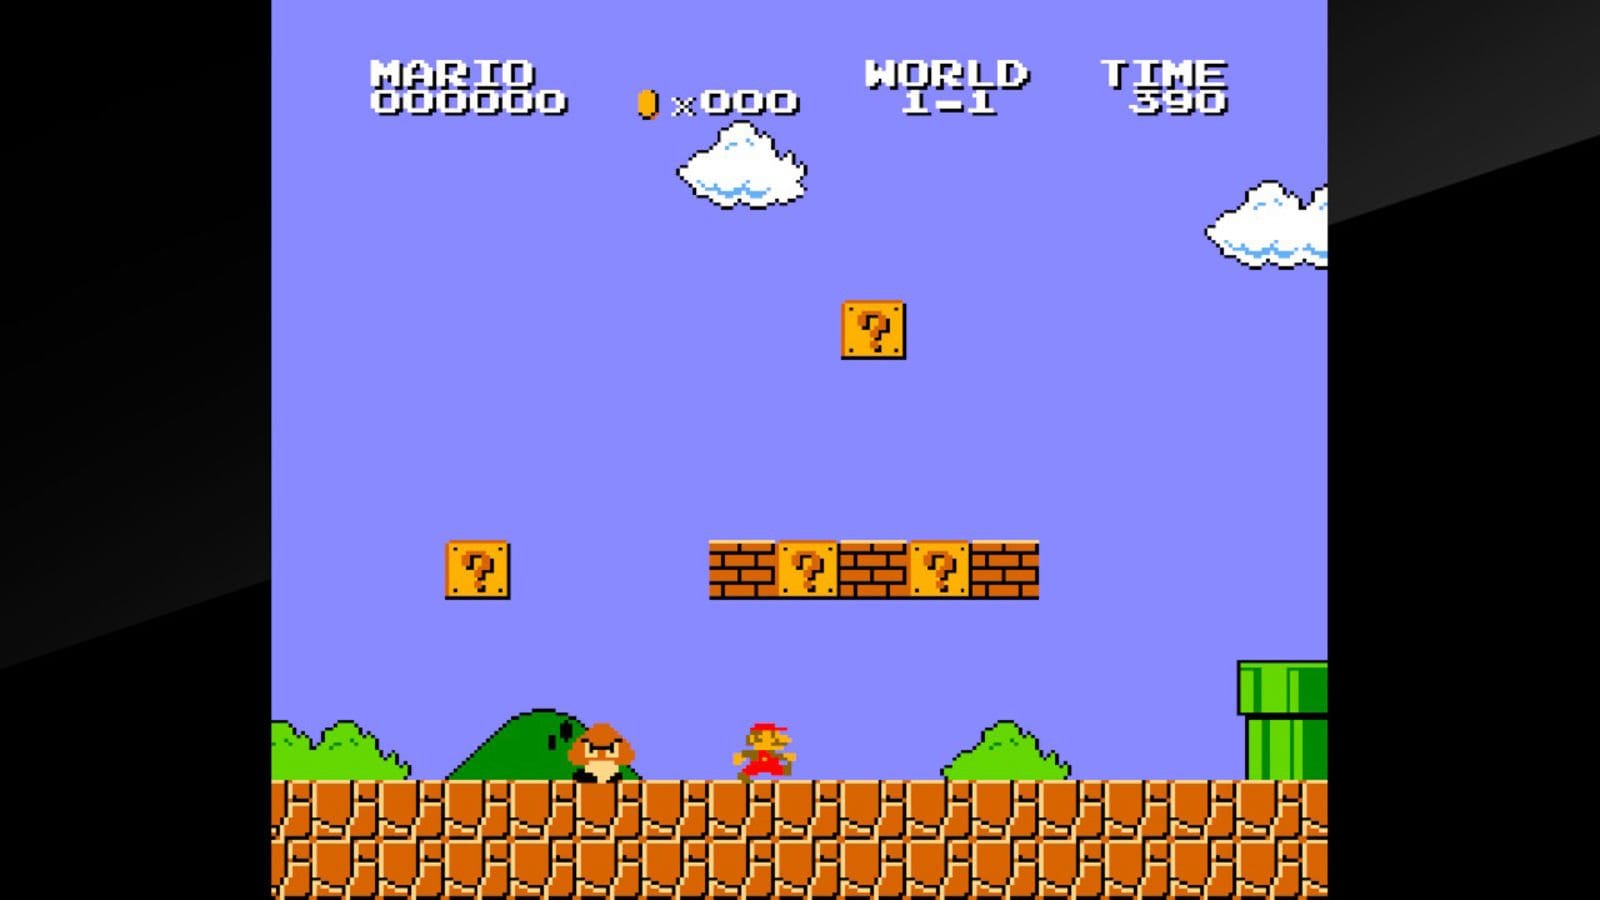 A typical scene in Super Mario Brothers, with Mario running along a course made of bricks, bad guys, and obstacles.